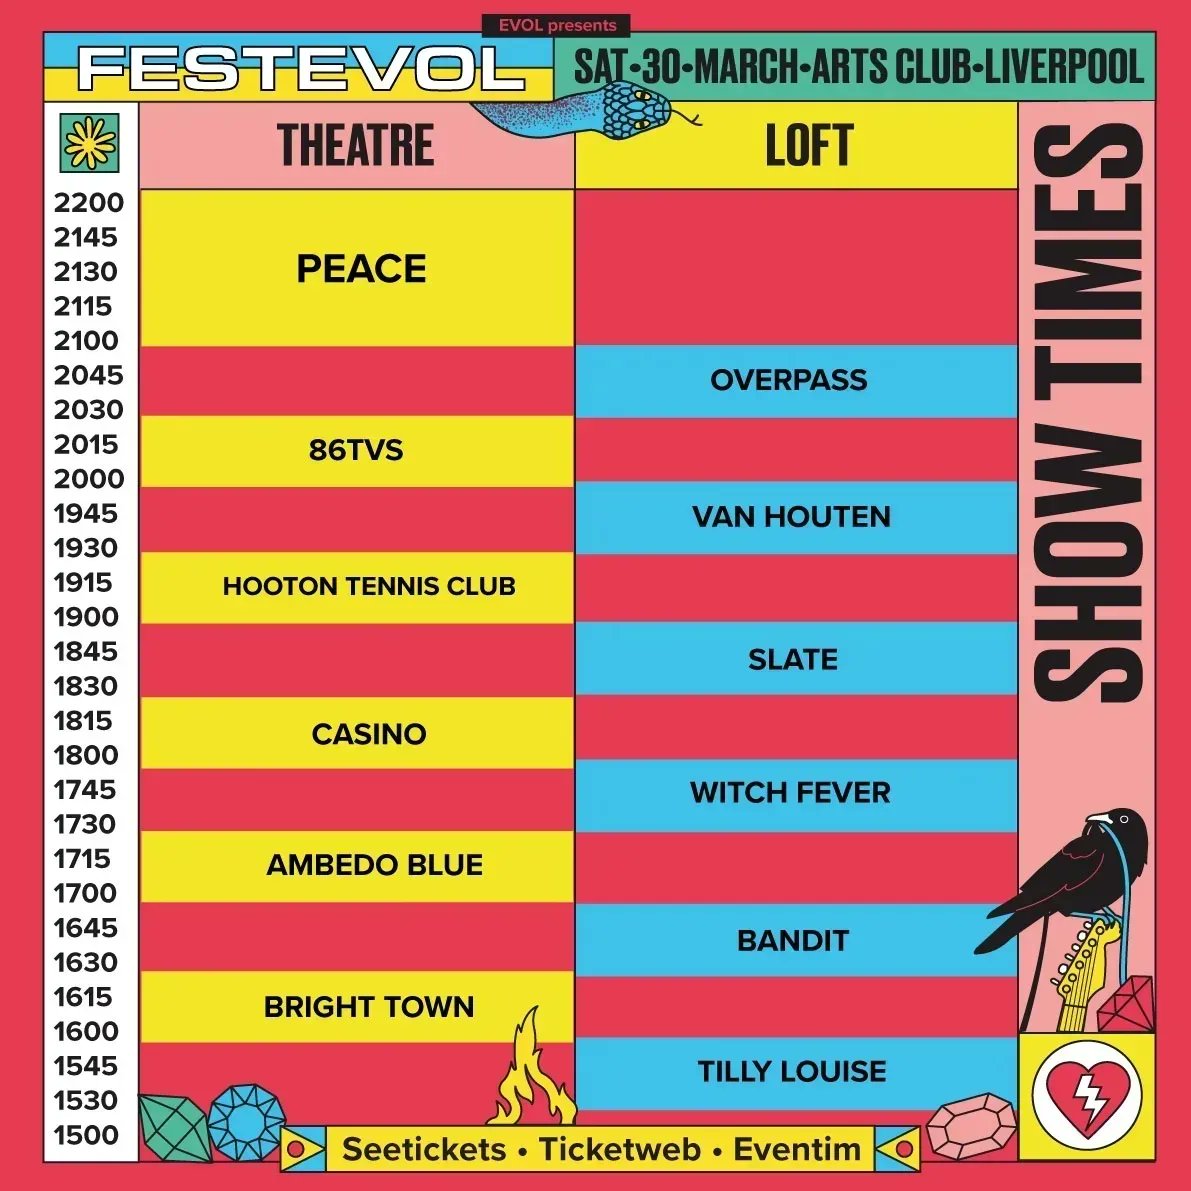 𝐒𝐇𝐎𝐖 𝐃𝐀𝐘
#FestEvol24 all-dayer TODAY at @artsclublpool 3pm - 10pm WITH @PEACE4EVEREVER @86TVsband @overpass_band @WITCHFEVER @hootontennisclb @Casino_band_ @vanhoutenuk @slatecaban @banditmusicuk

Last tickets (off-sale 2pm): seetickets.com/event/festevol… OR pay on the door -x-